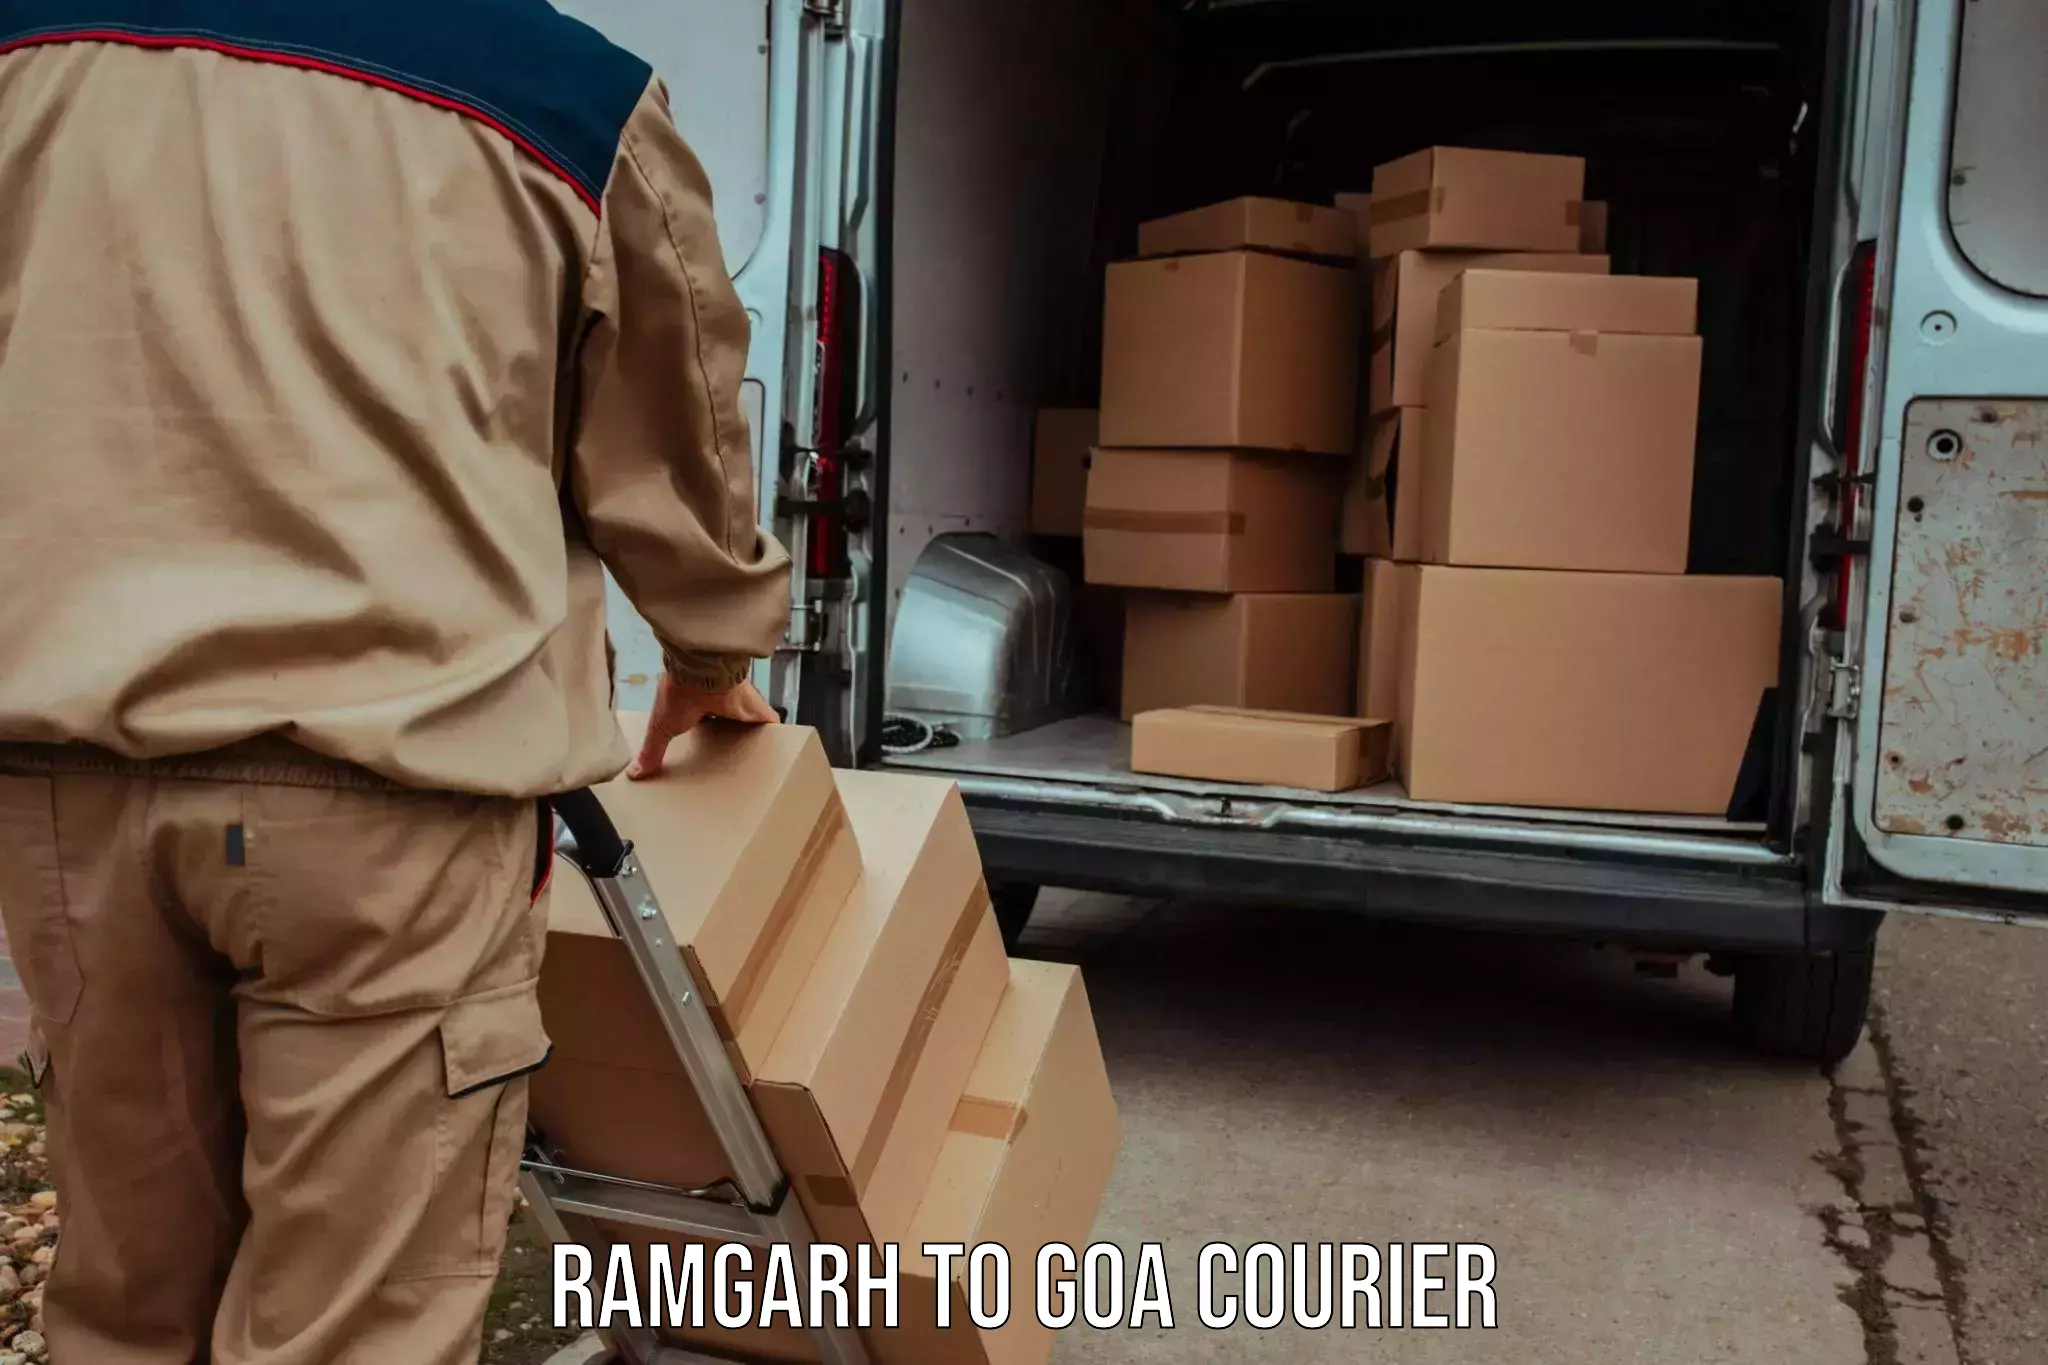 Flexible delivery schedules Ramgarh to Panjim